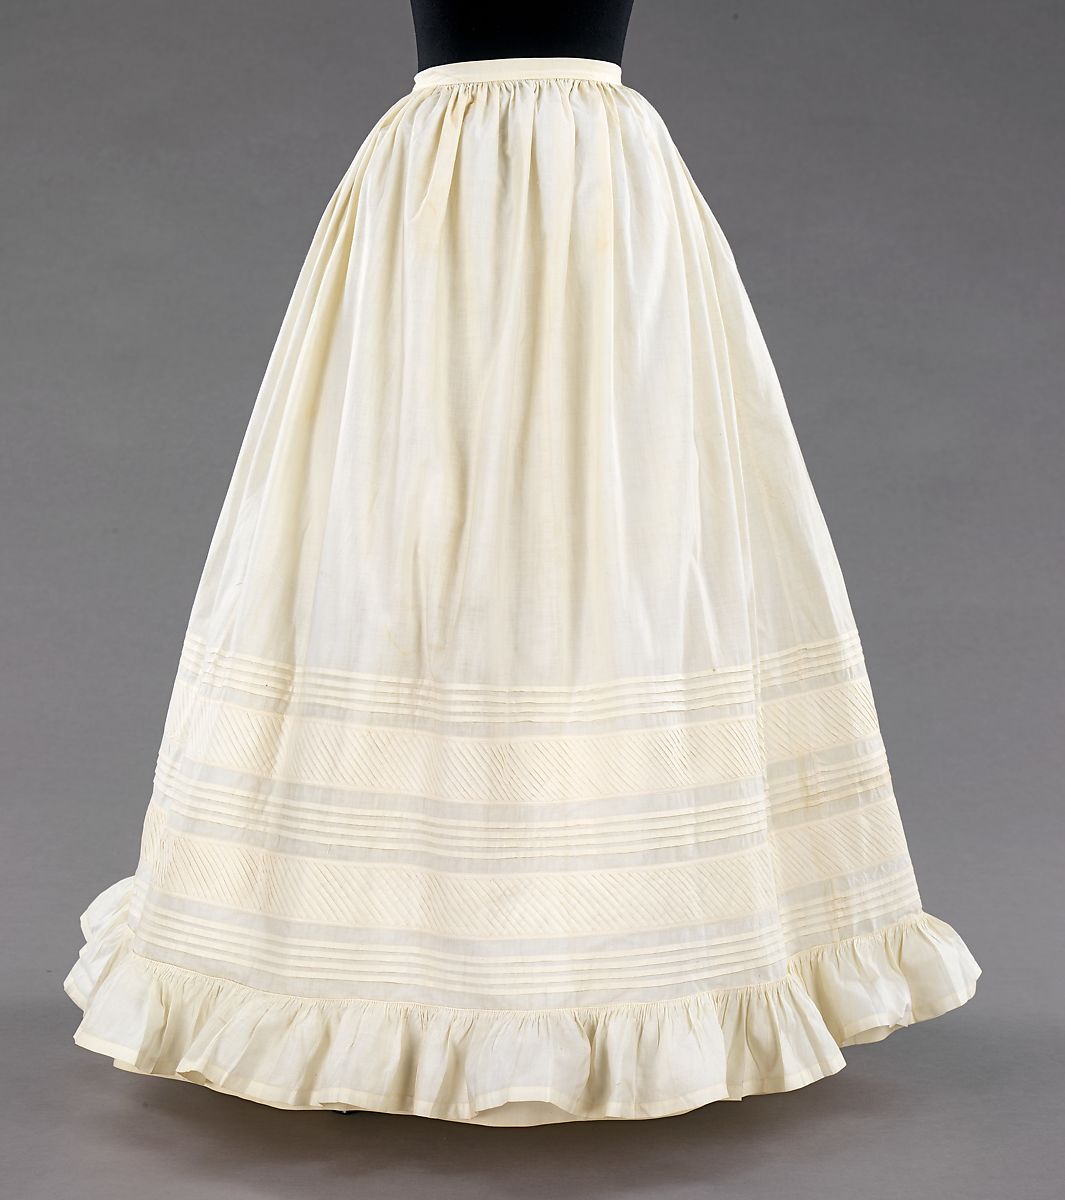 Details more than 67 19th century skirt